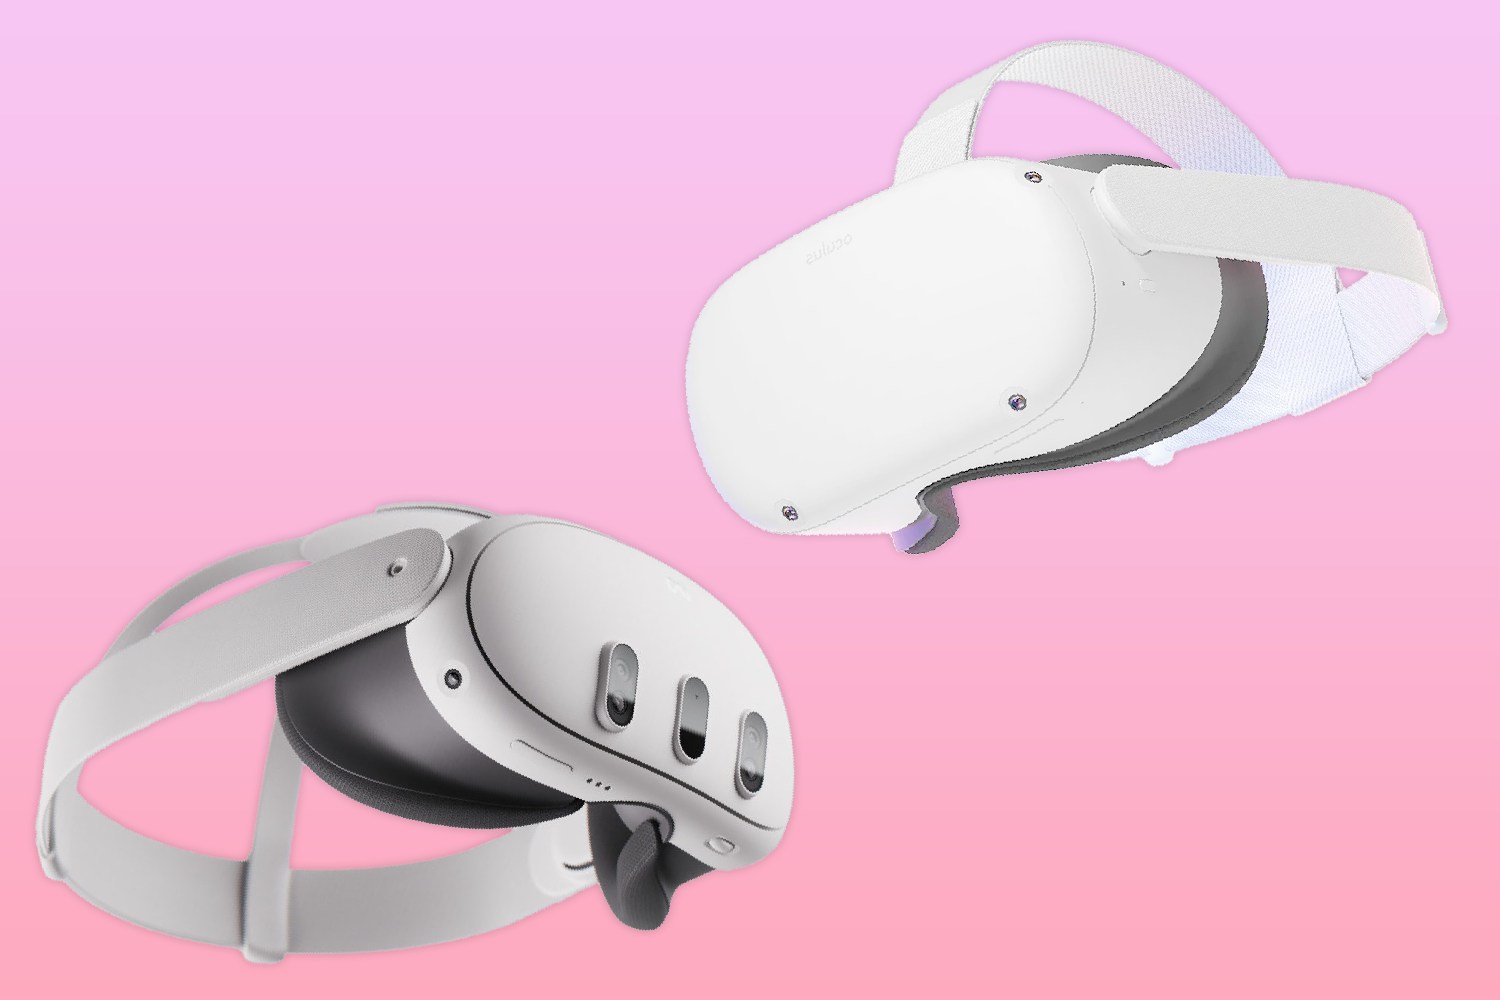 Discover the Meta Quest 2 VR headset | Official Meta reseller